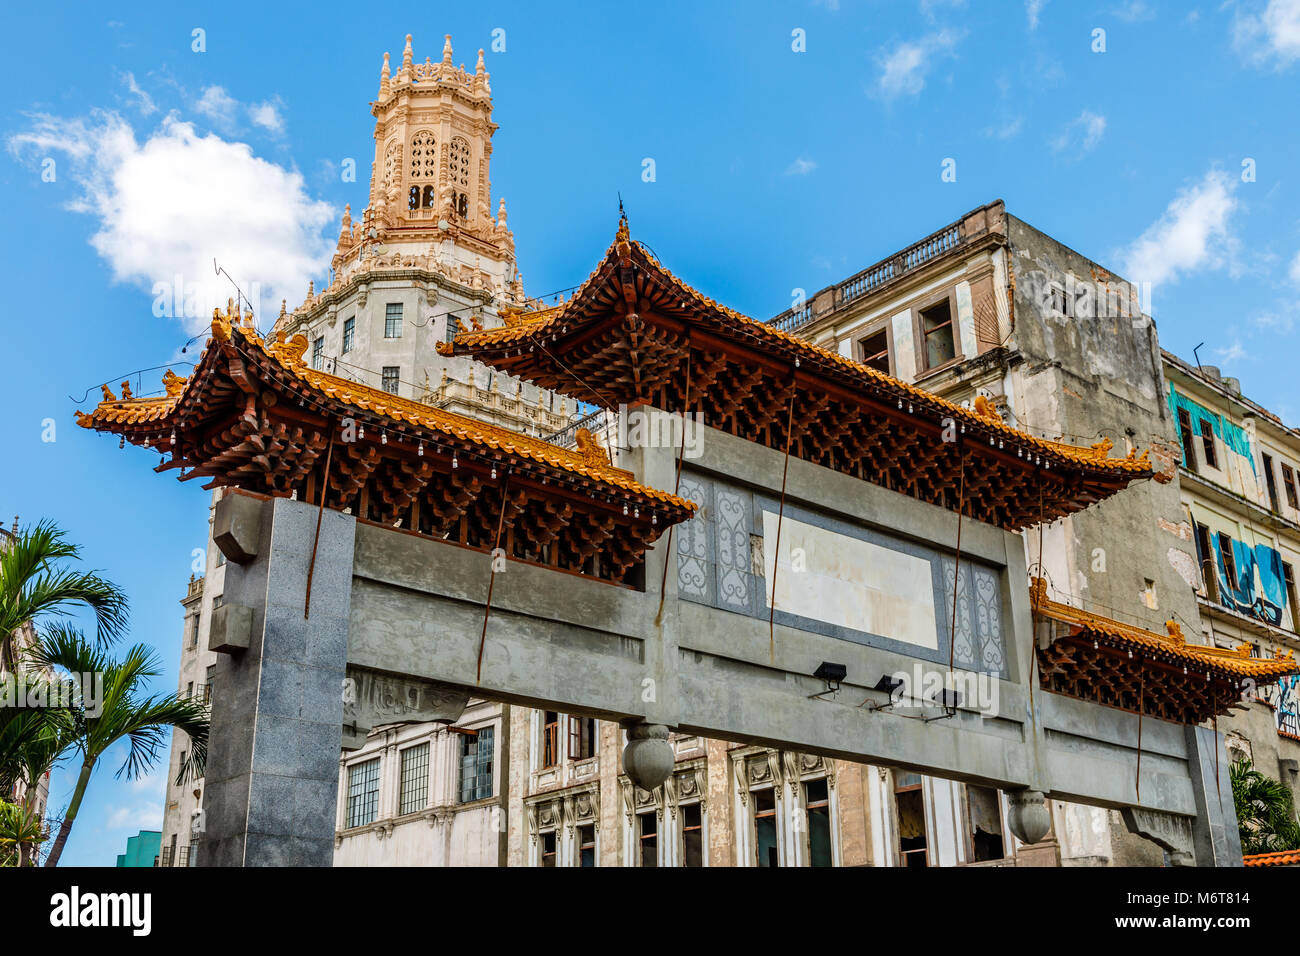 Abandoned chinatown arch and old slums in the background, Havana, Cuba Stock Photo